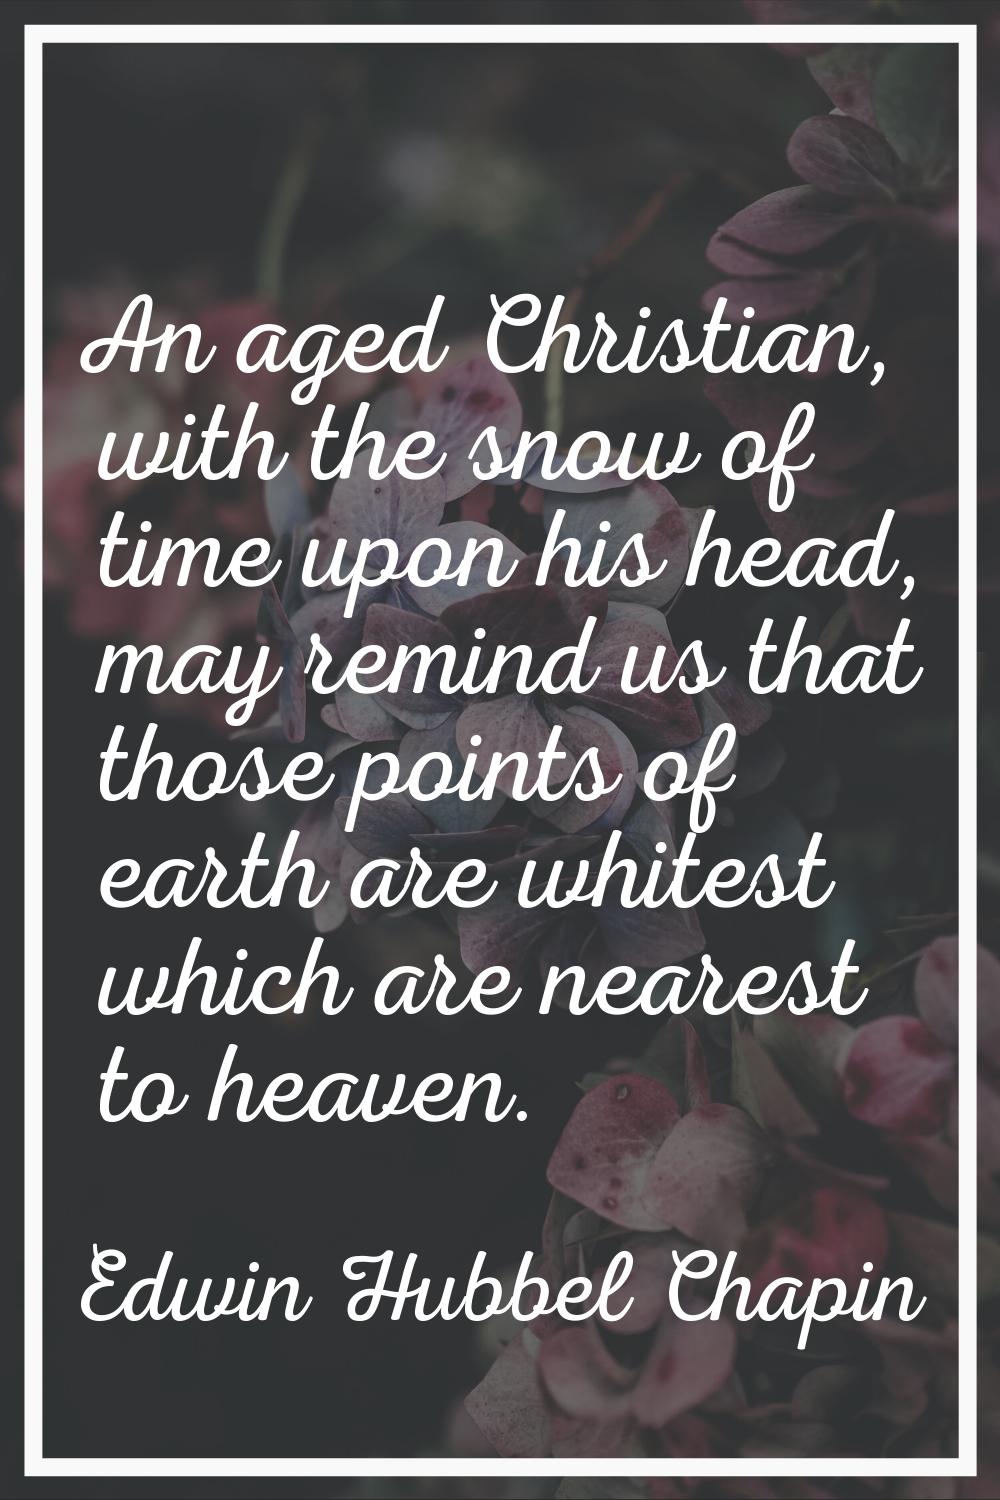 An aged Christian, with the snow of time upon his head, may remind us that those points of earth ar